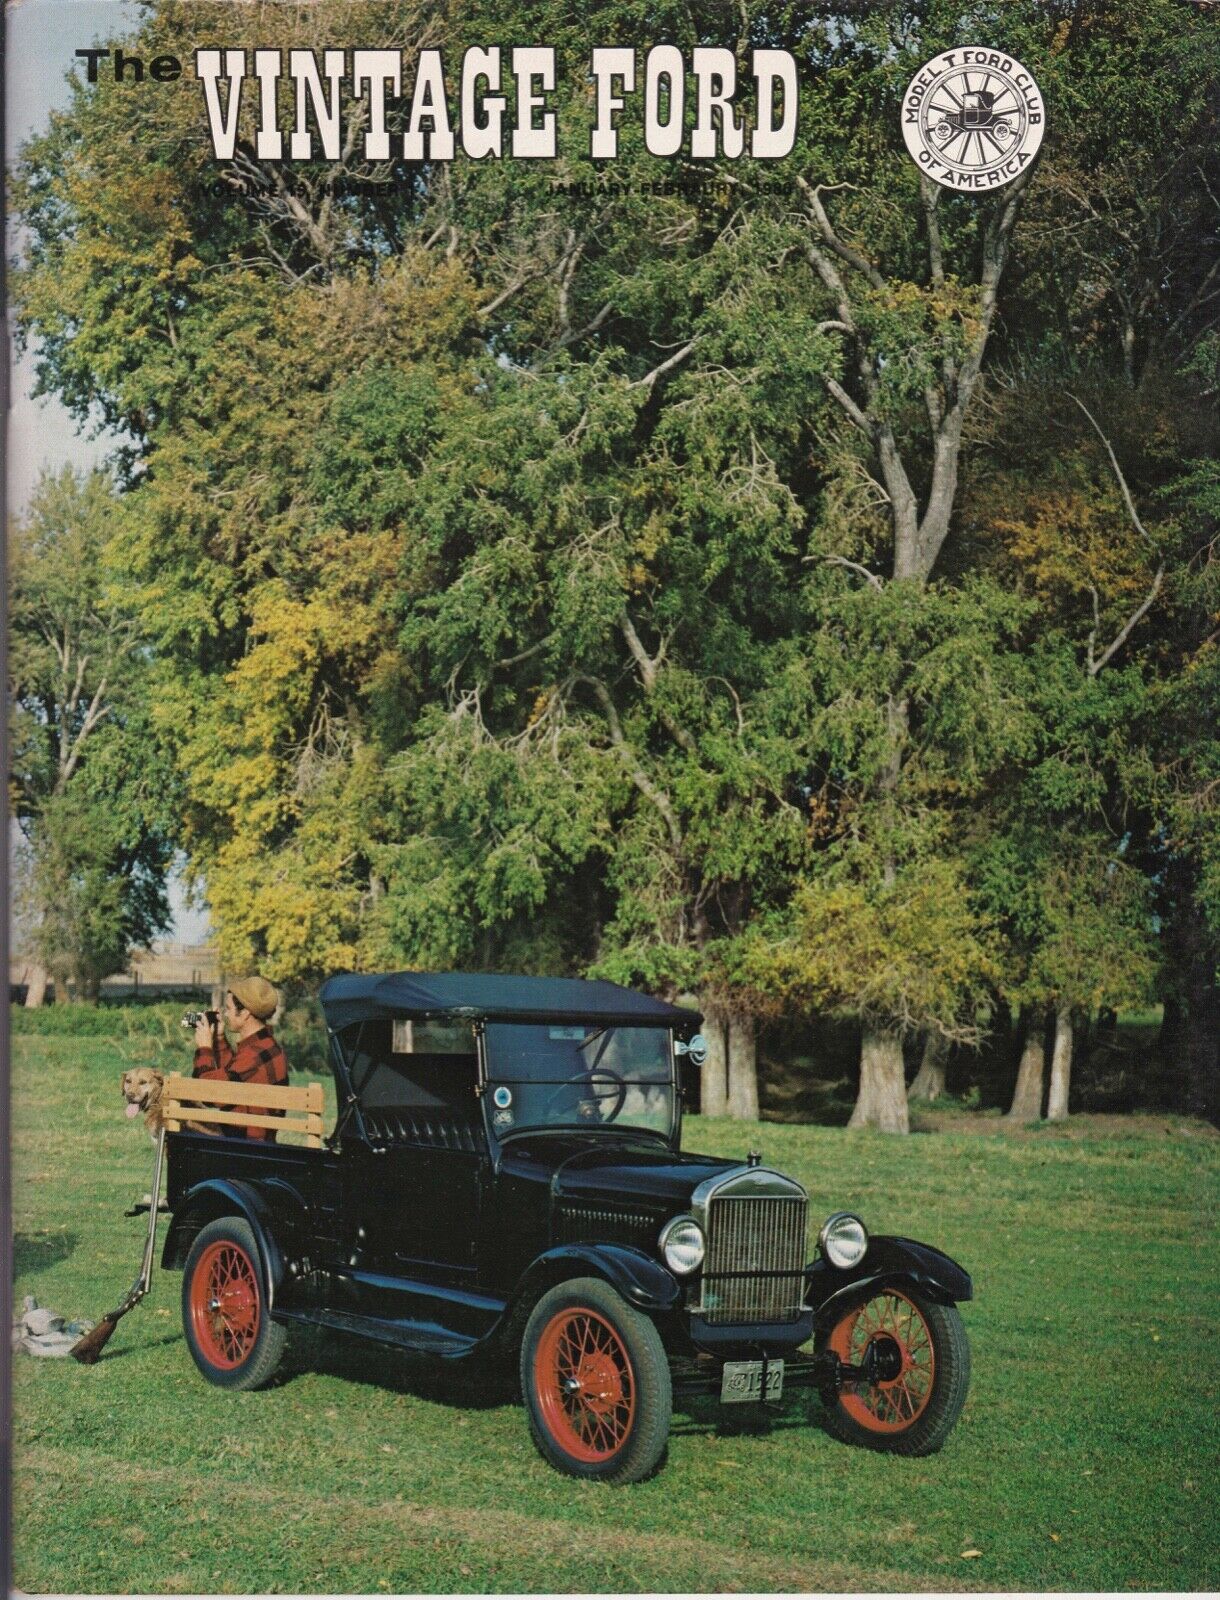 1924-1925 FORDS - THE VINTAGE FORD 1980 MAGAZINE - MOST EXTENSIVE COVERAGE YET